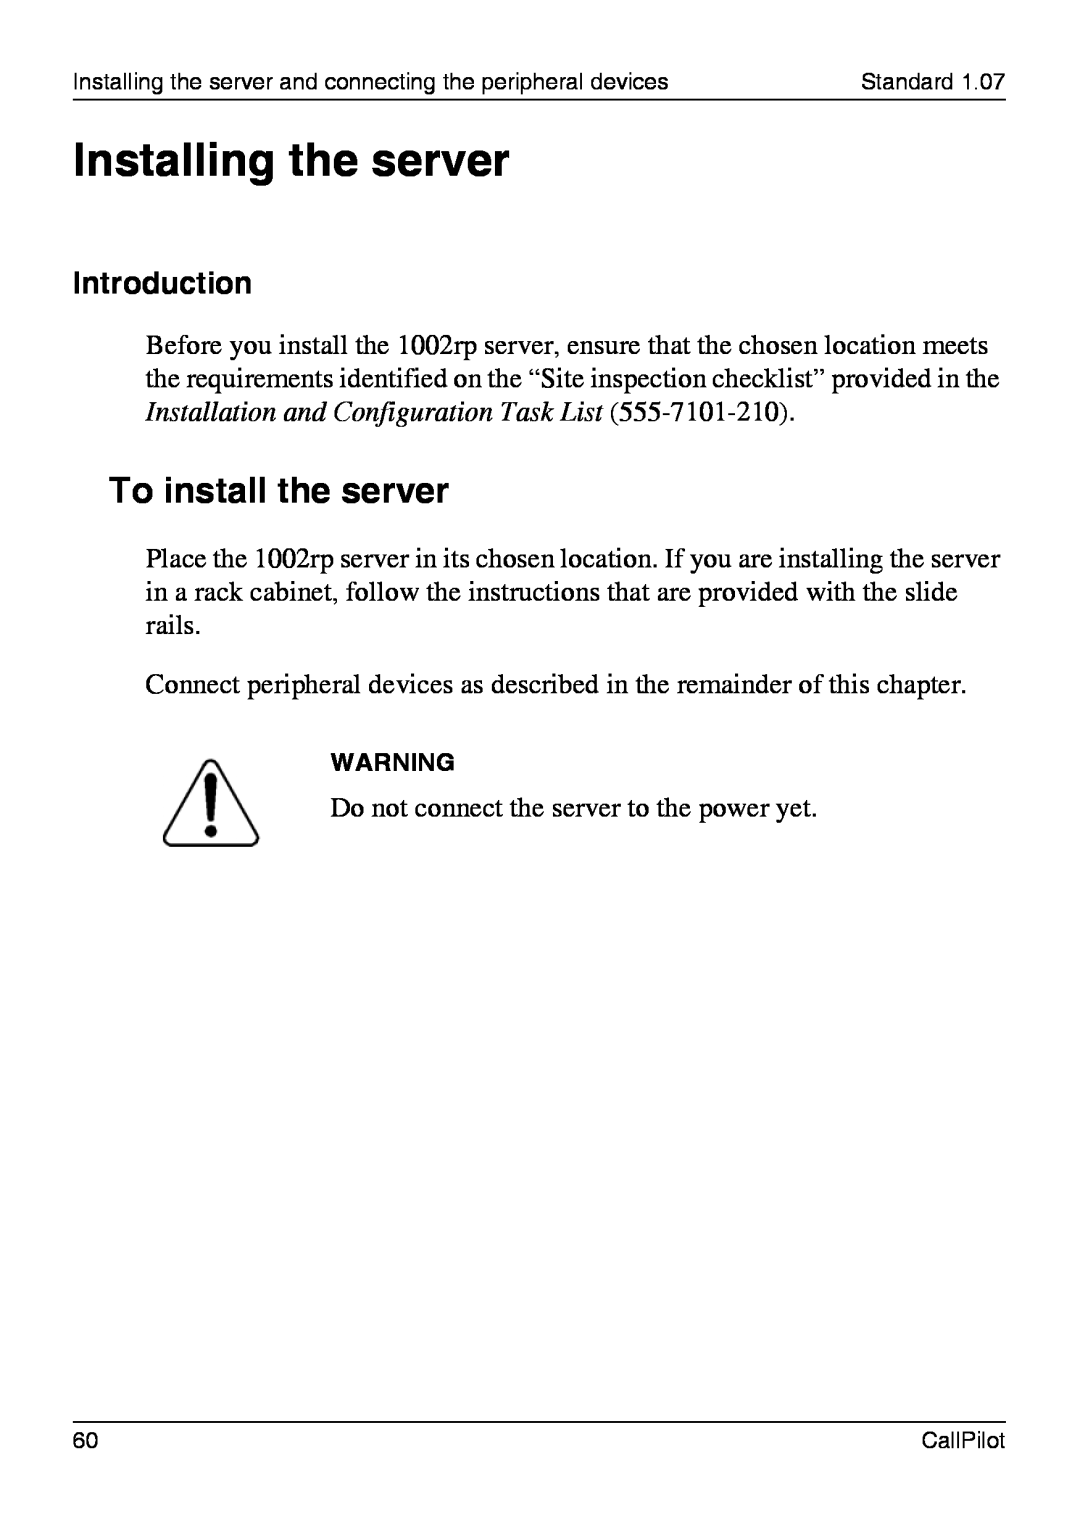 Nortel Networks 1002rp manual Installing the server, To install the server, Introduction 